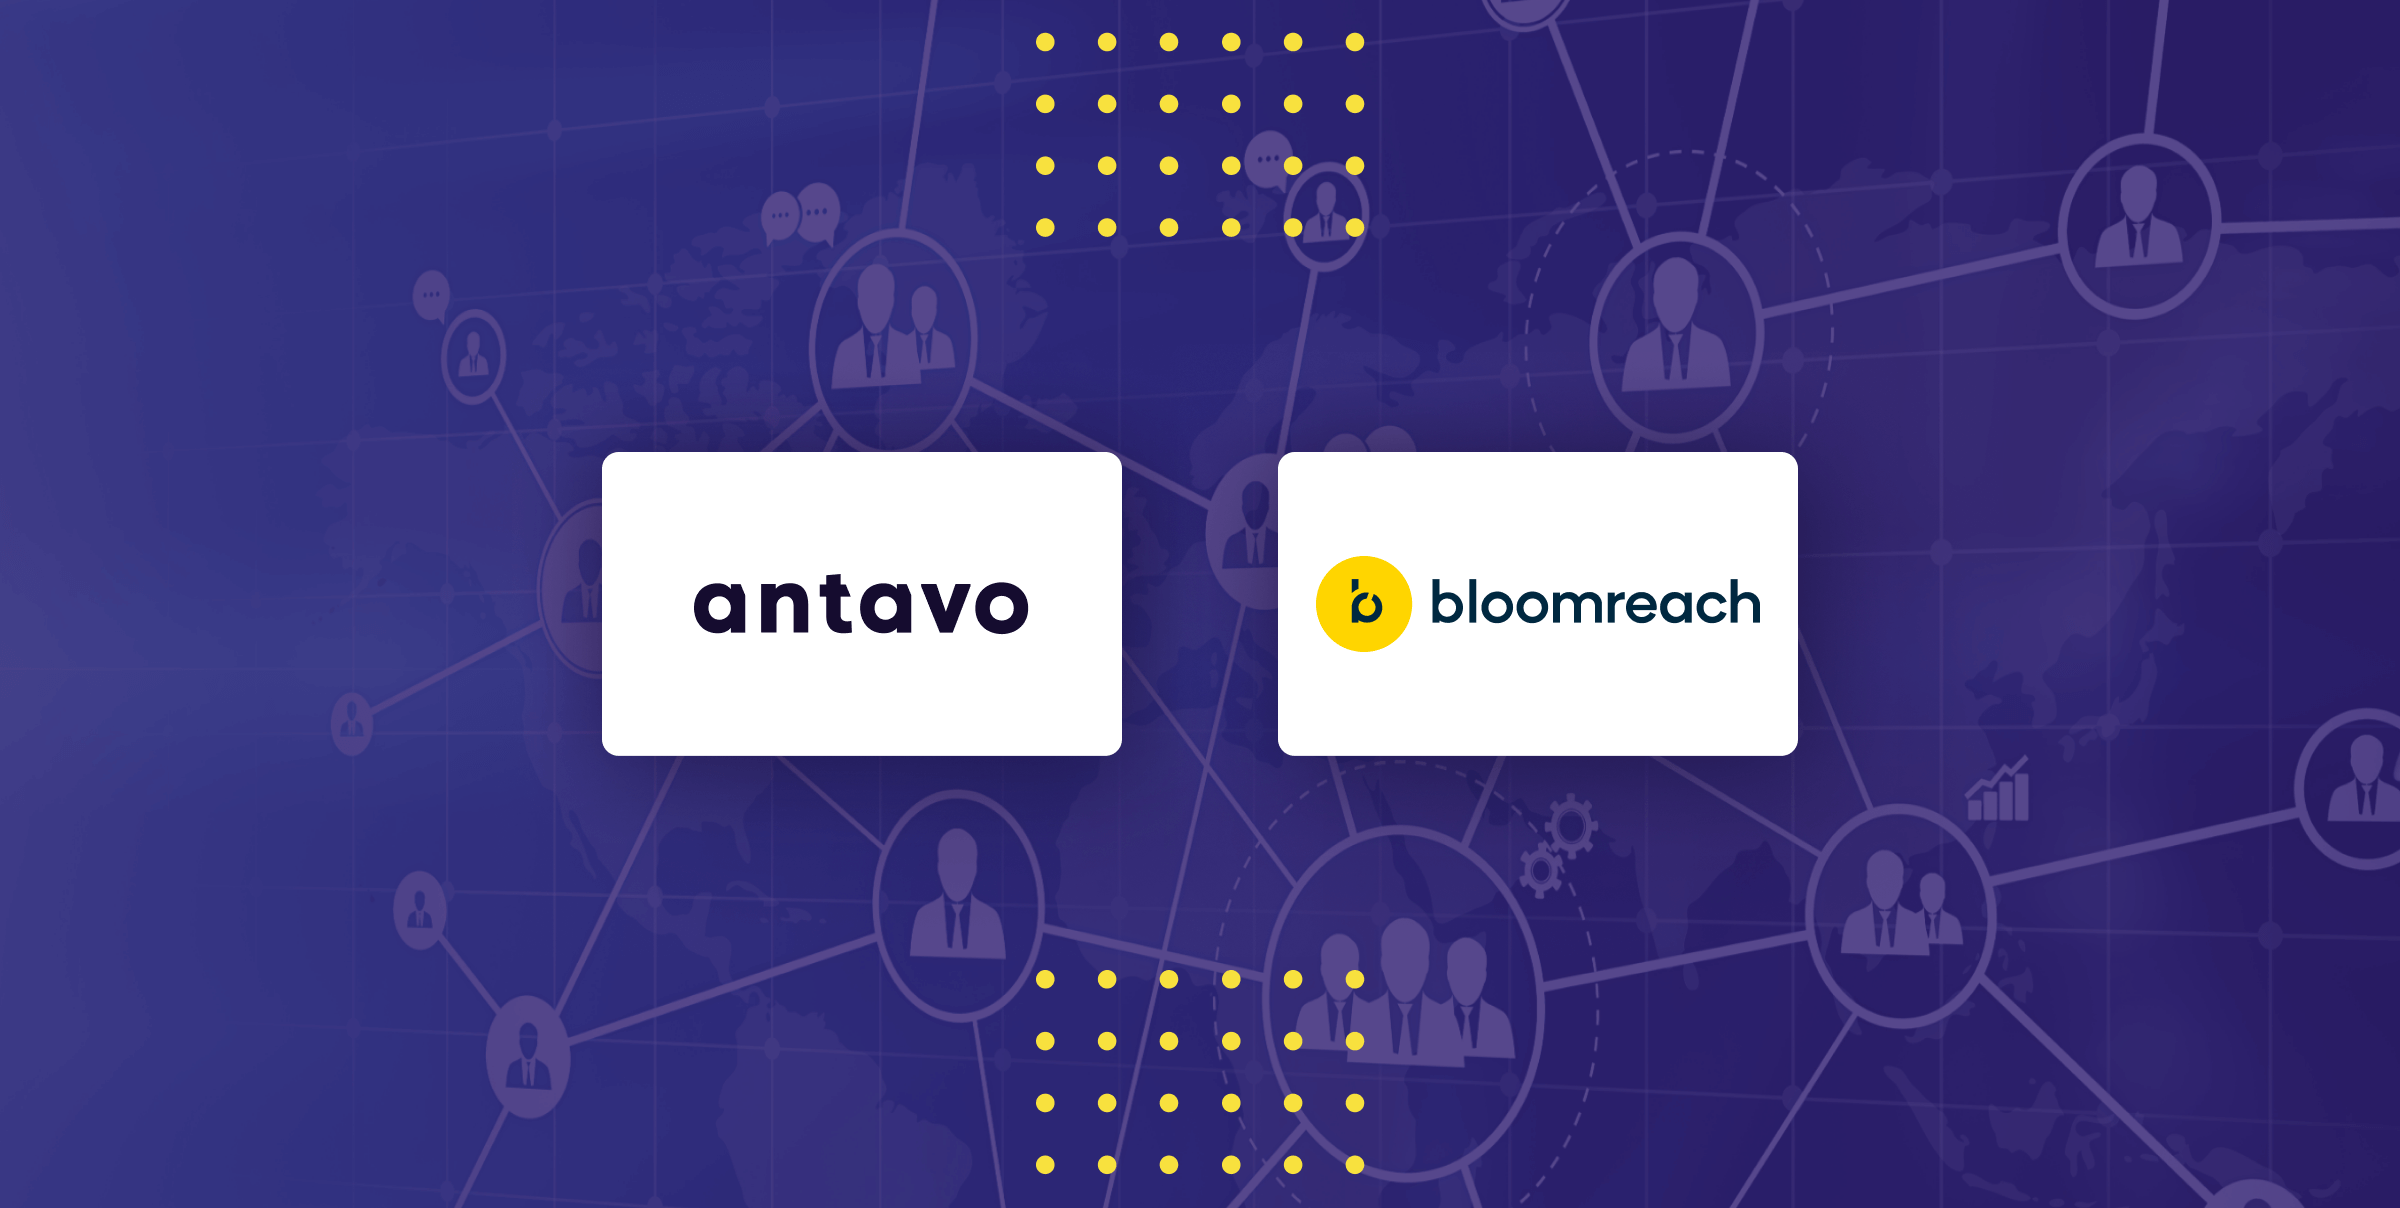 The cover image for Antavo’s news article on its partnership with Bloomreach